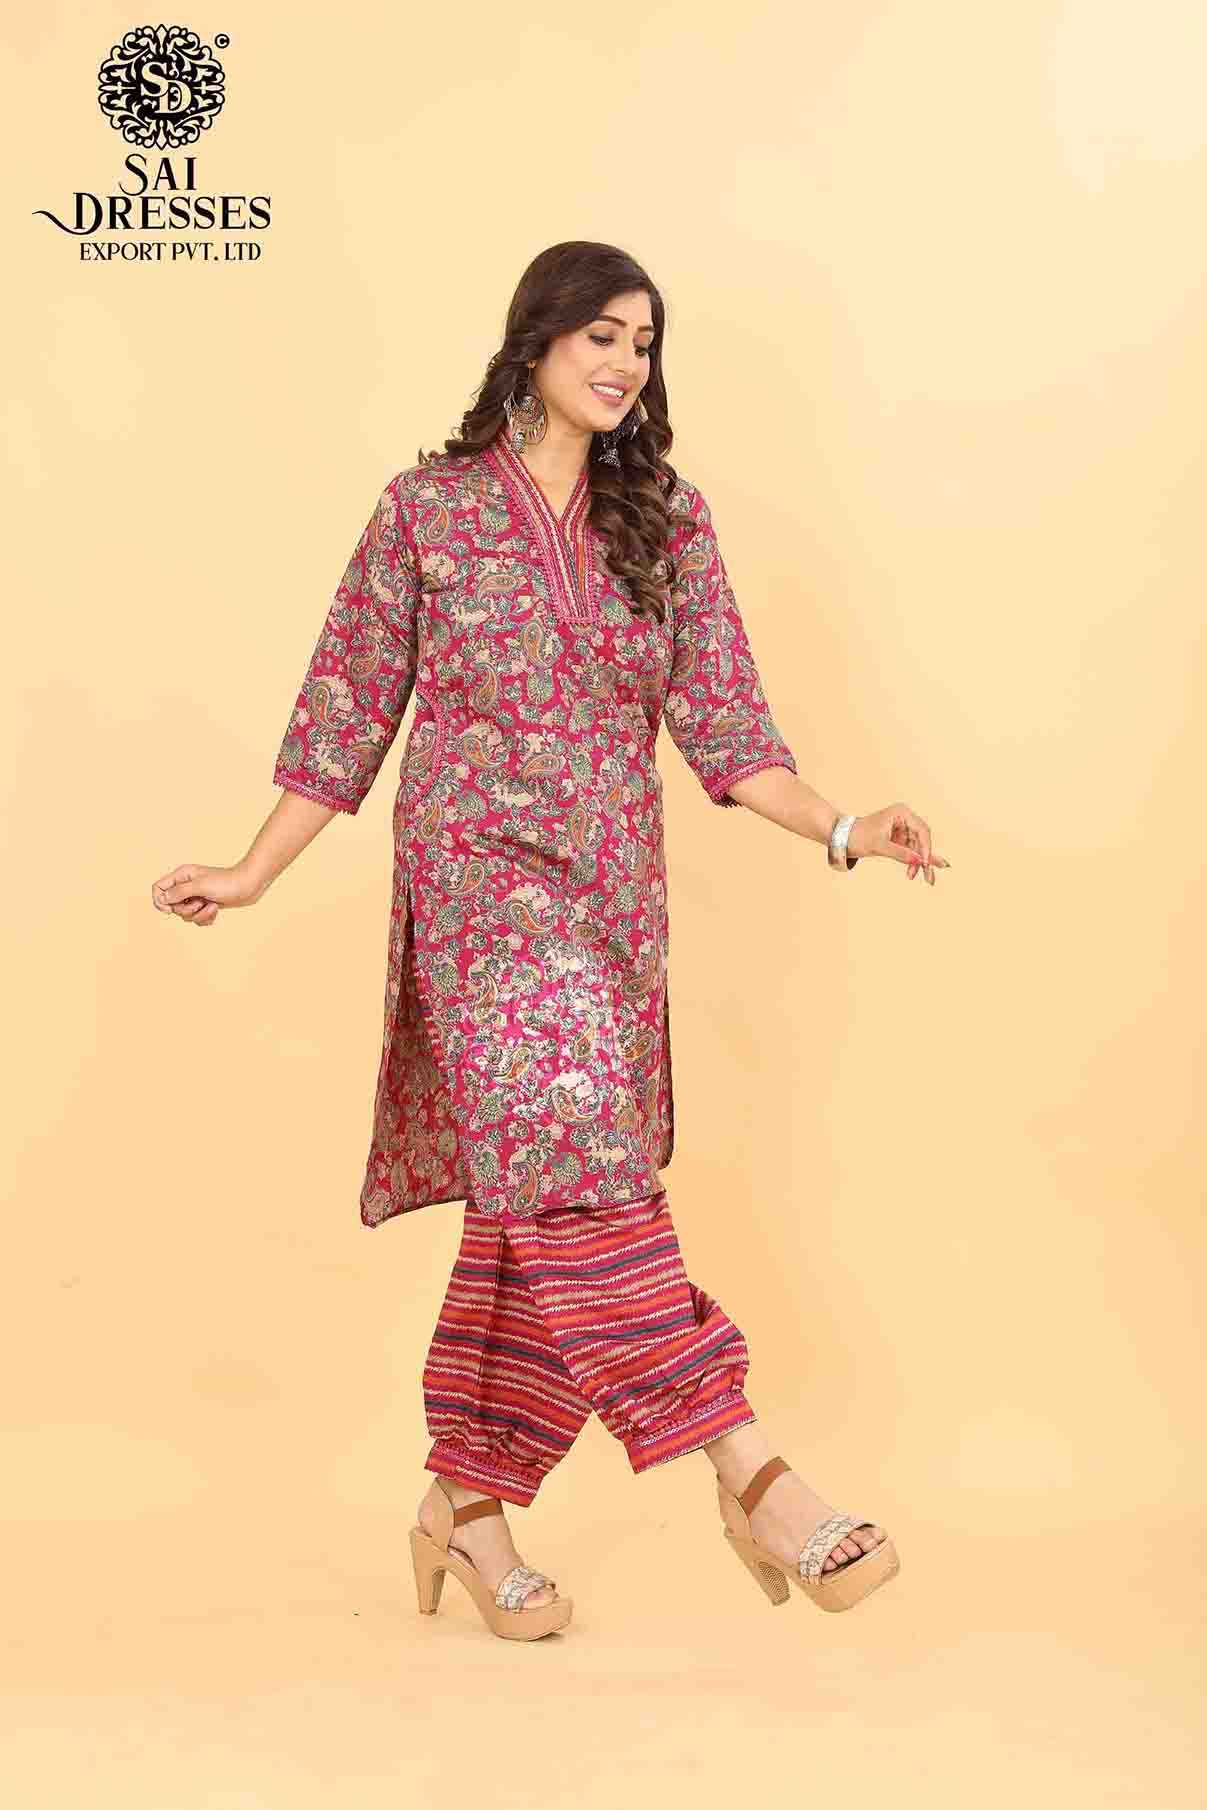 SAI DRESSES PRESENT D.NO SD 5010 READY TO EXCLUSIVE TRENDY WEAR PATHANI KURTA WITH AFGHANI PANT STYLE COMBO COLLECTION IN WHOLESALE RATE IN SURAT